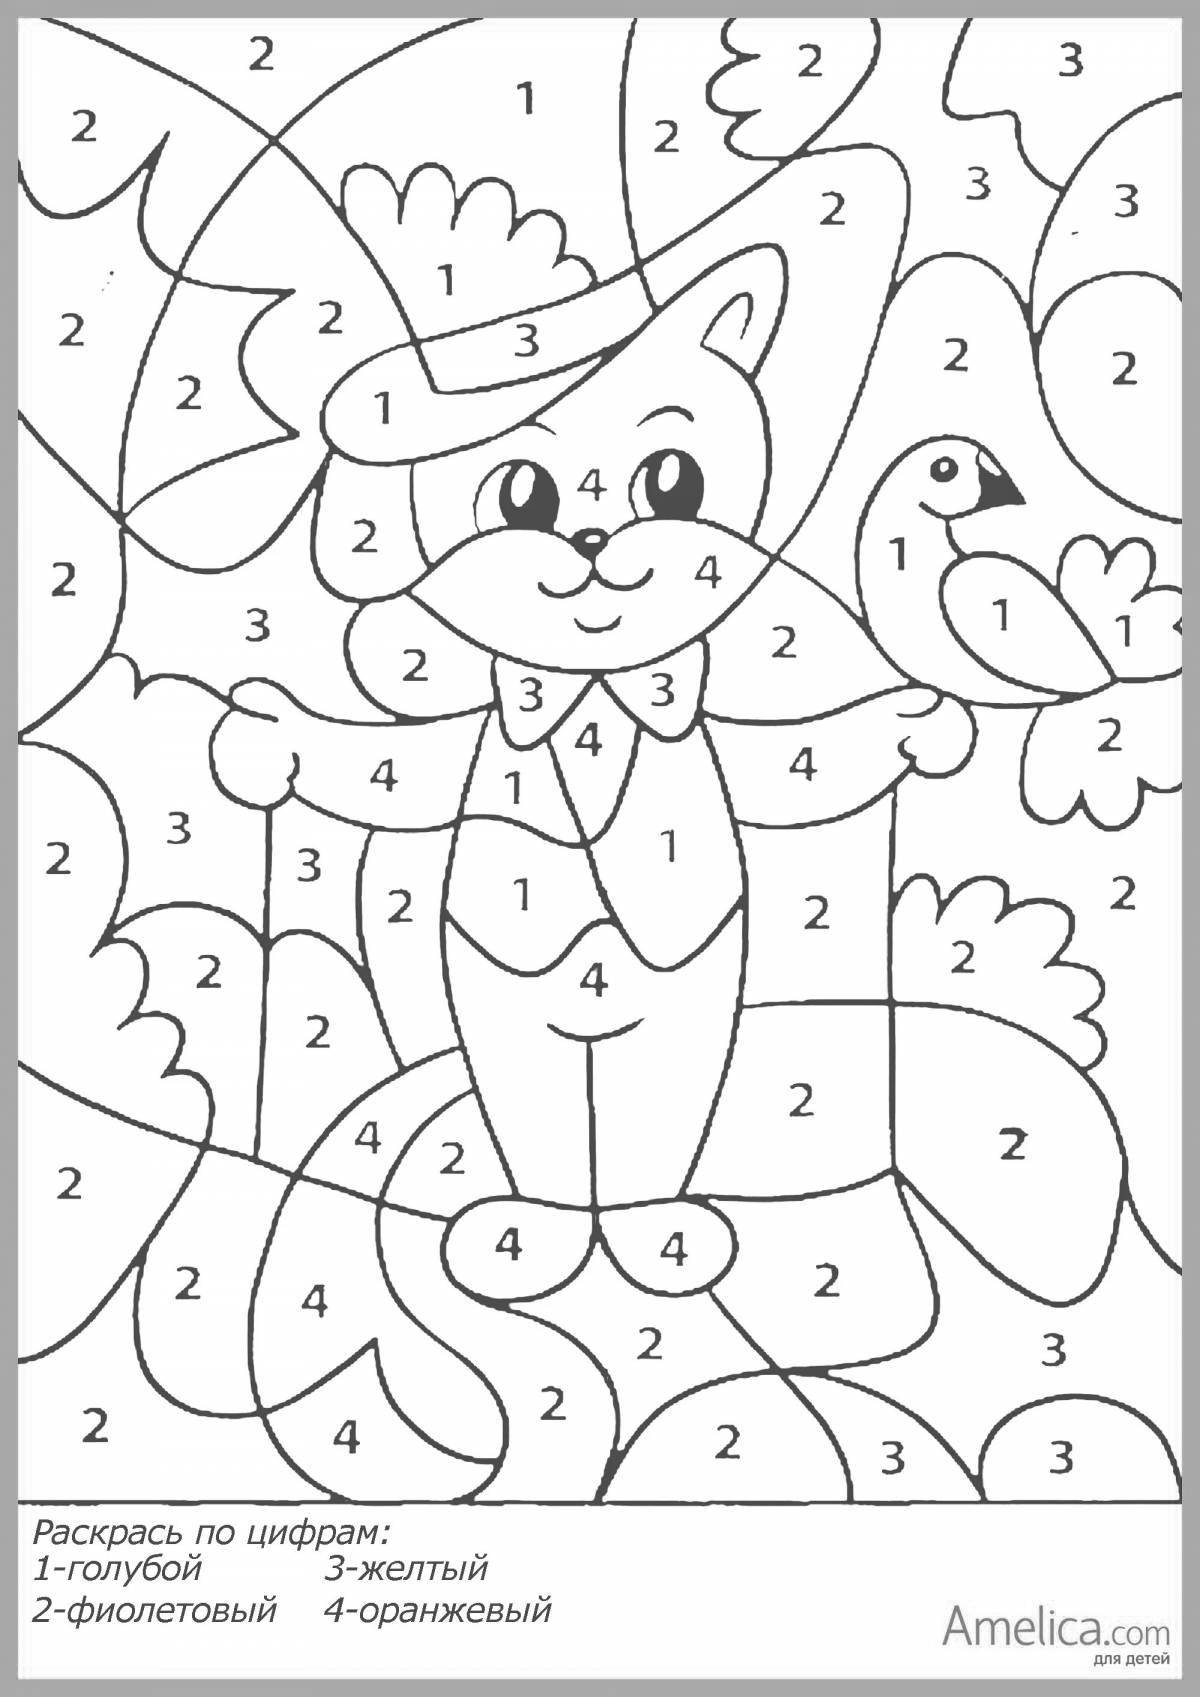 Creative children's coloring by numbers